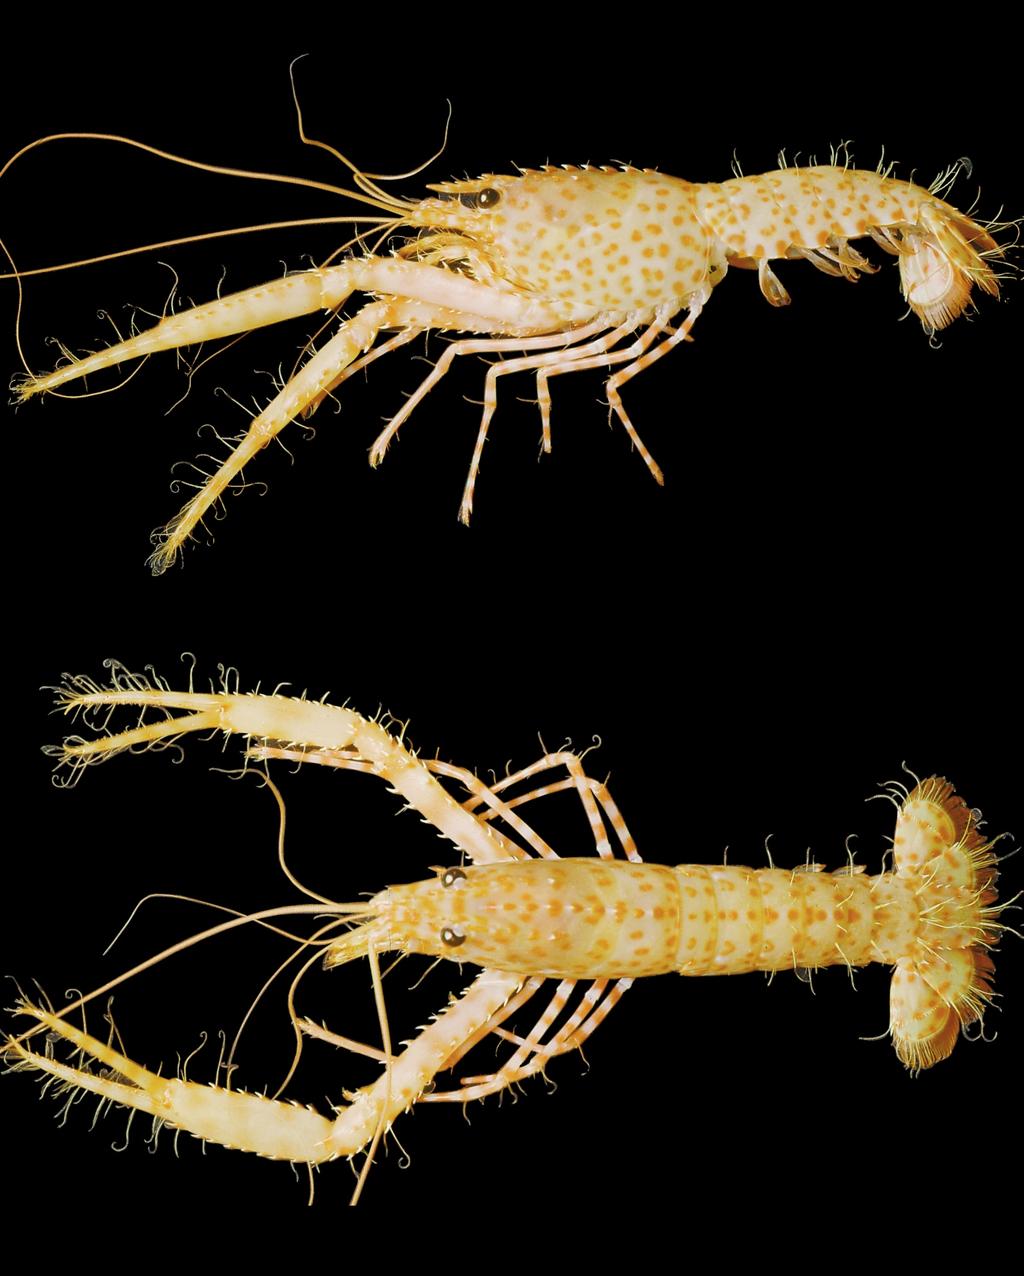 Lobsters Enoplometopus (Crustacea, Decapoda) from French Polynesia A B FIG. 4.